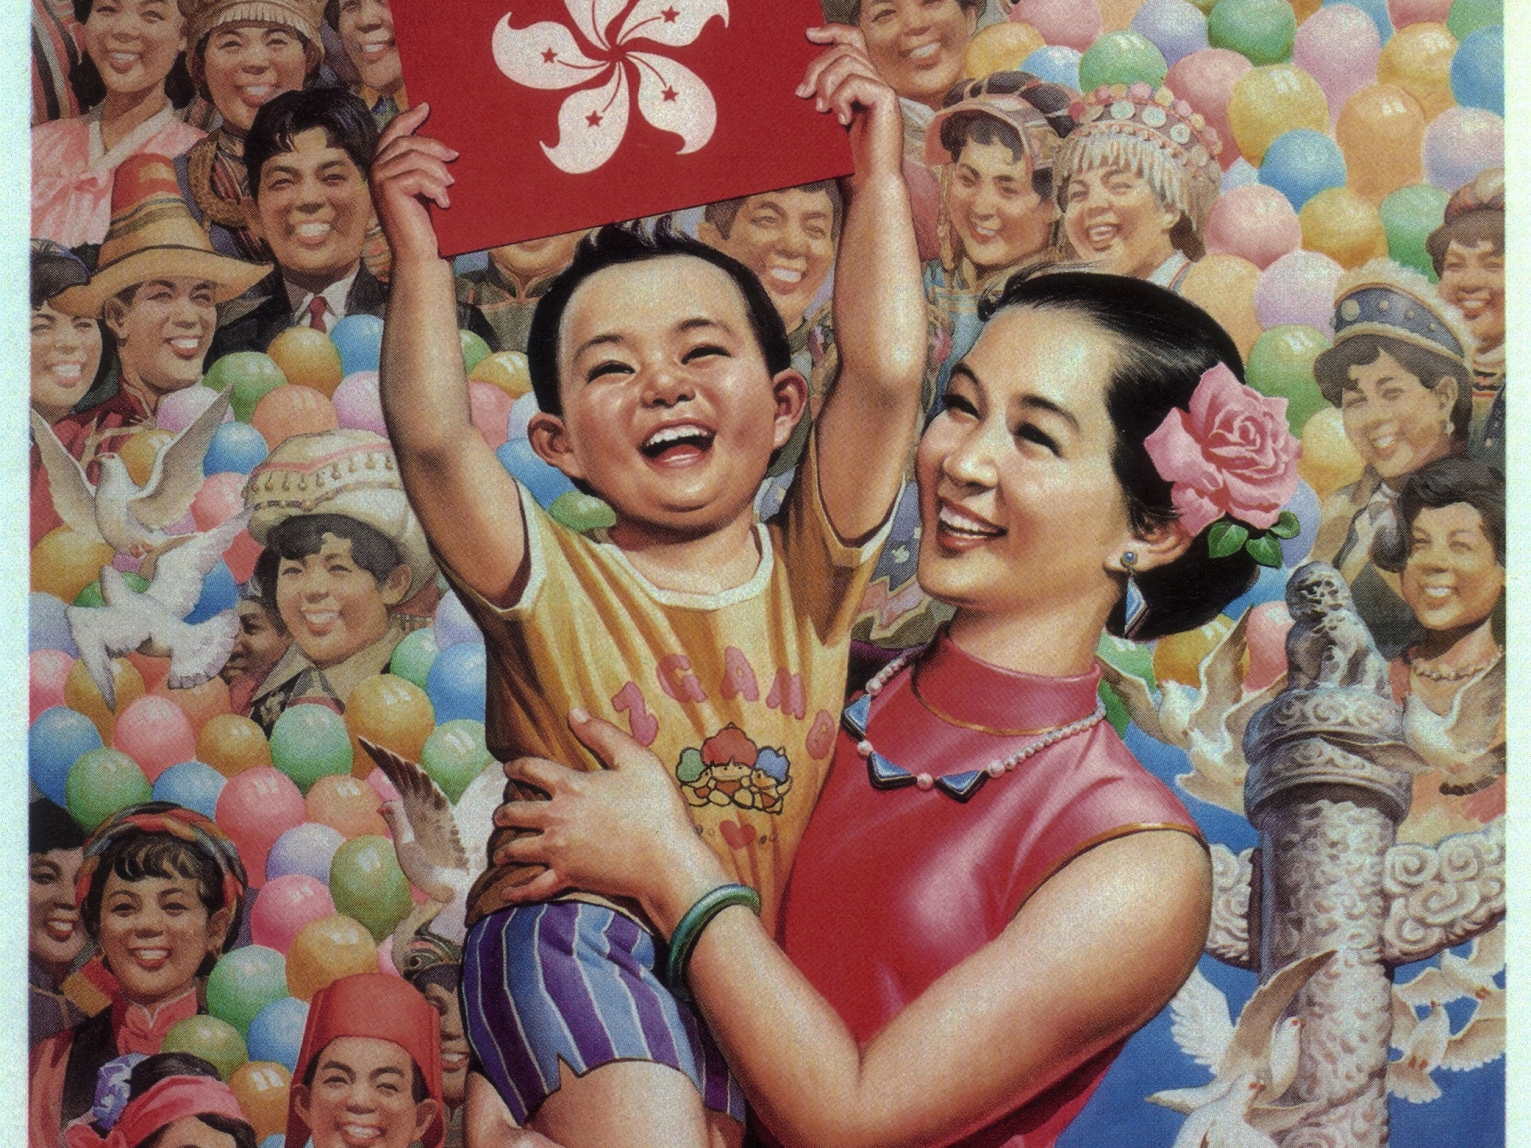 A Chinese propaganda poster from 1997 entitled "Enthusiastically Celebrate the Return of Hong Kong."